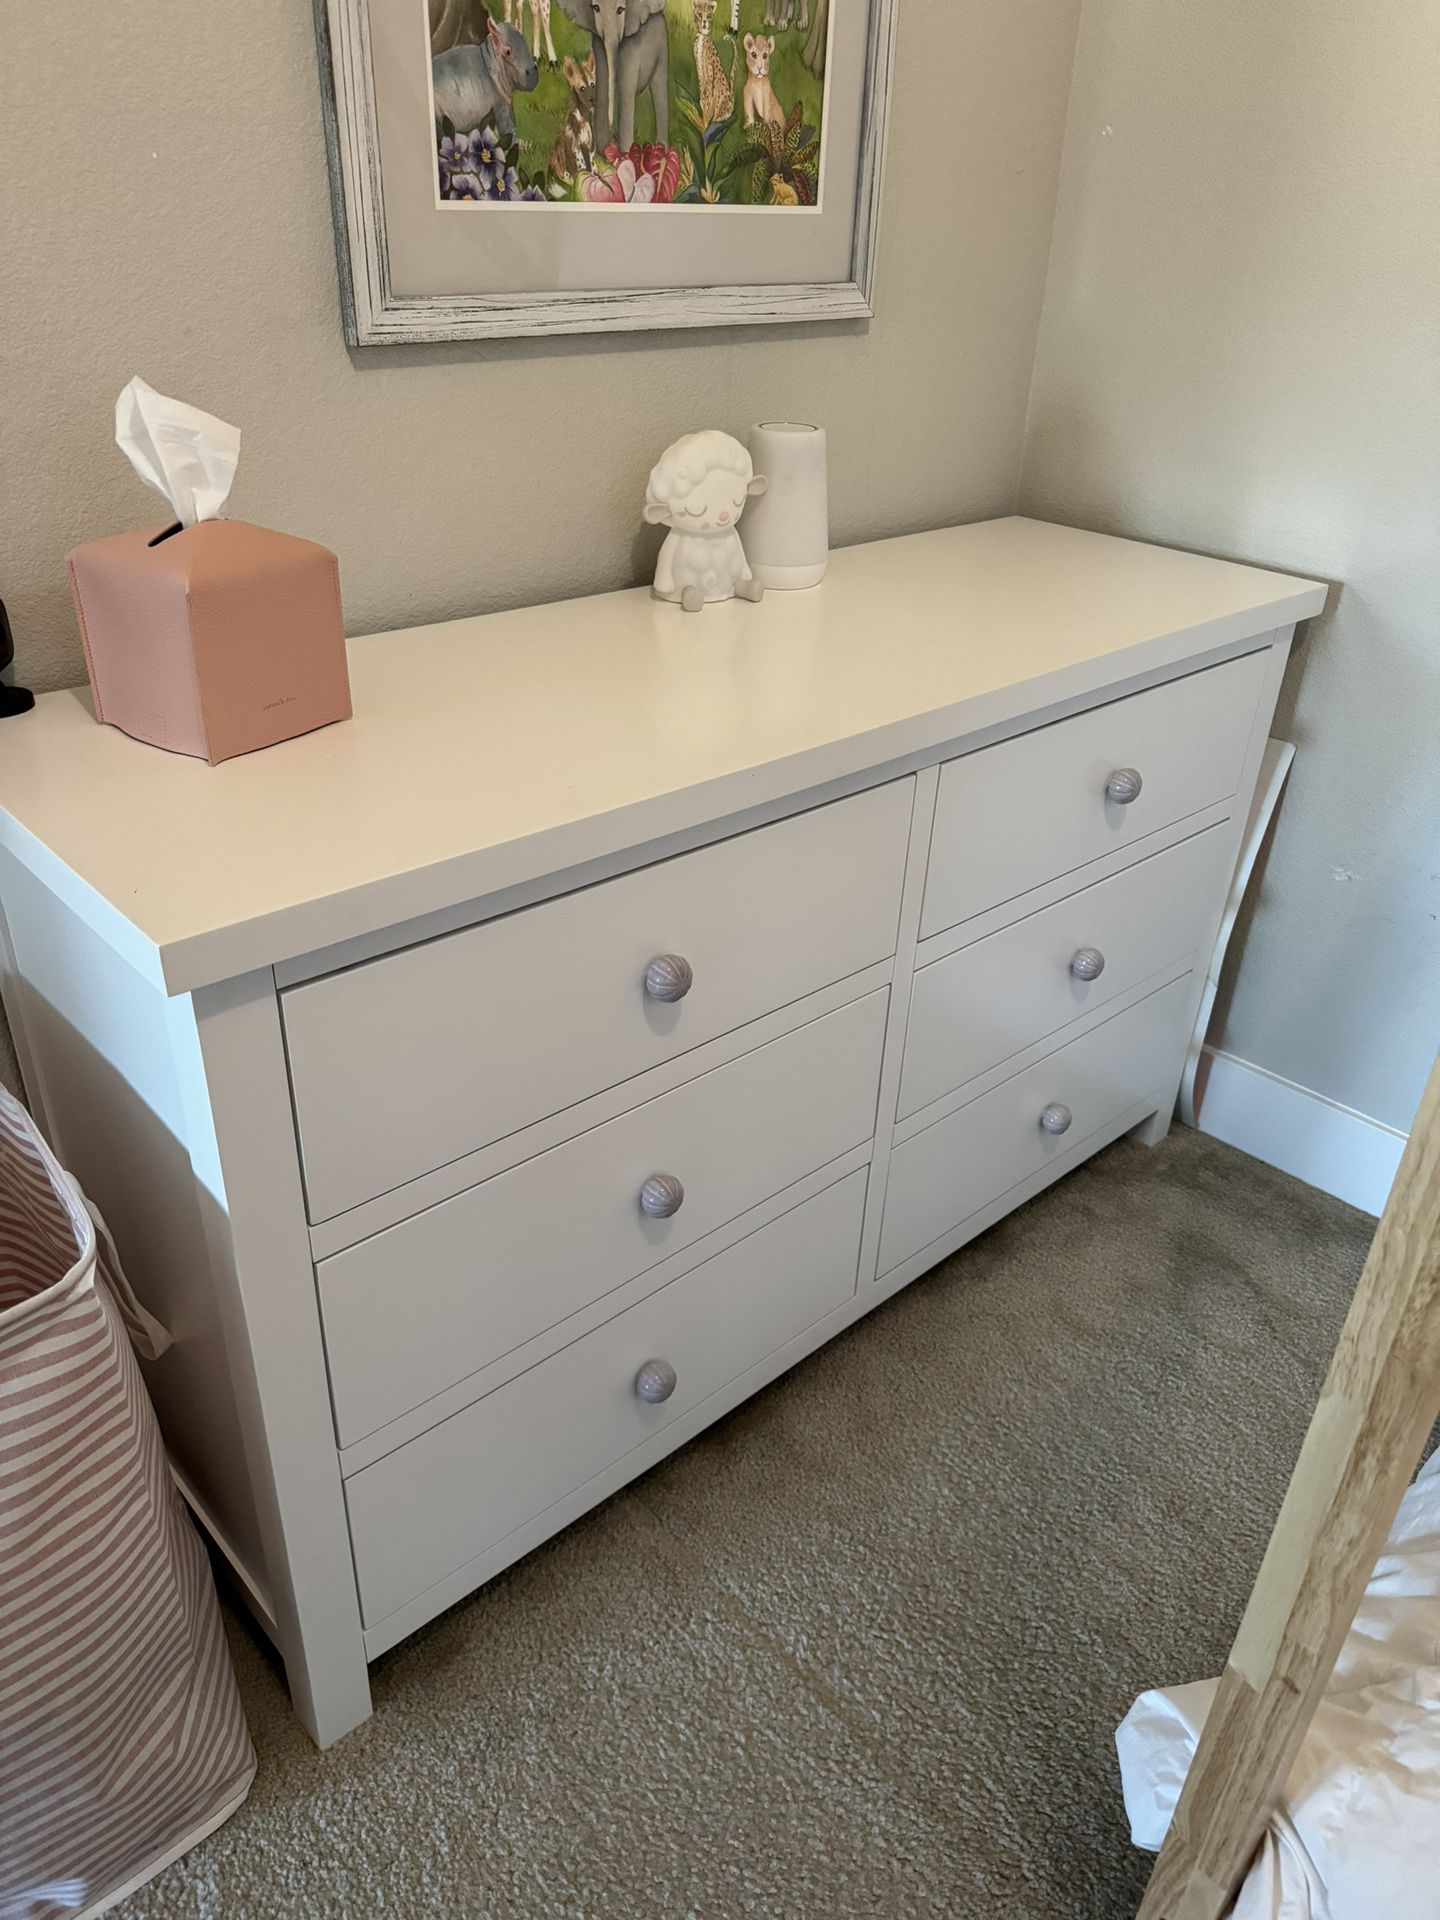 6 Drawer Dresser From Living Spaces